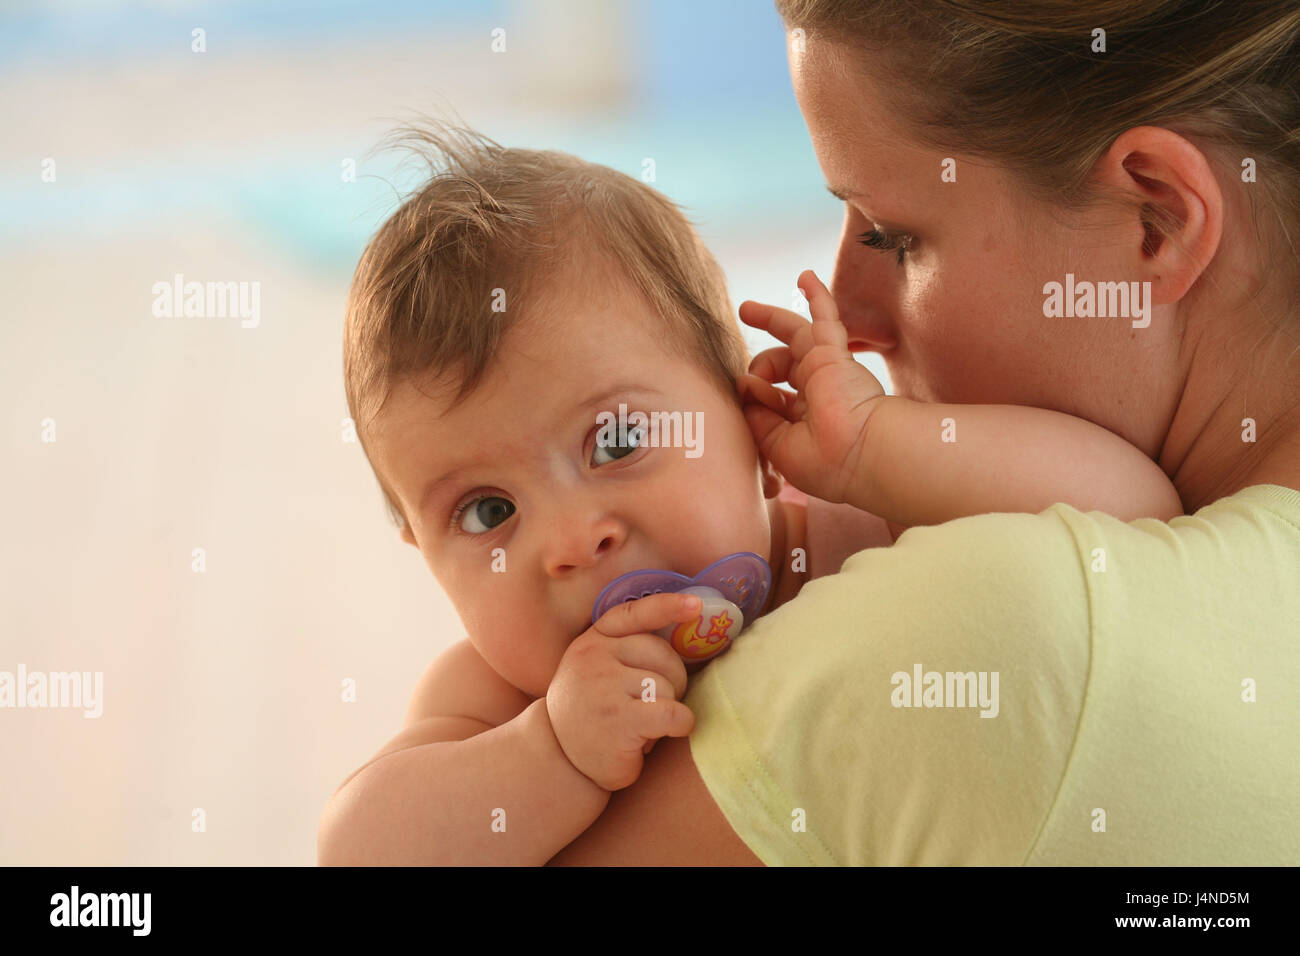 Mother, infant, carry, comfort, curled, Stock Photo